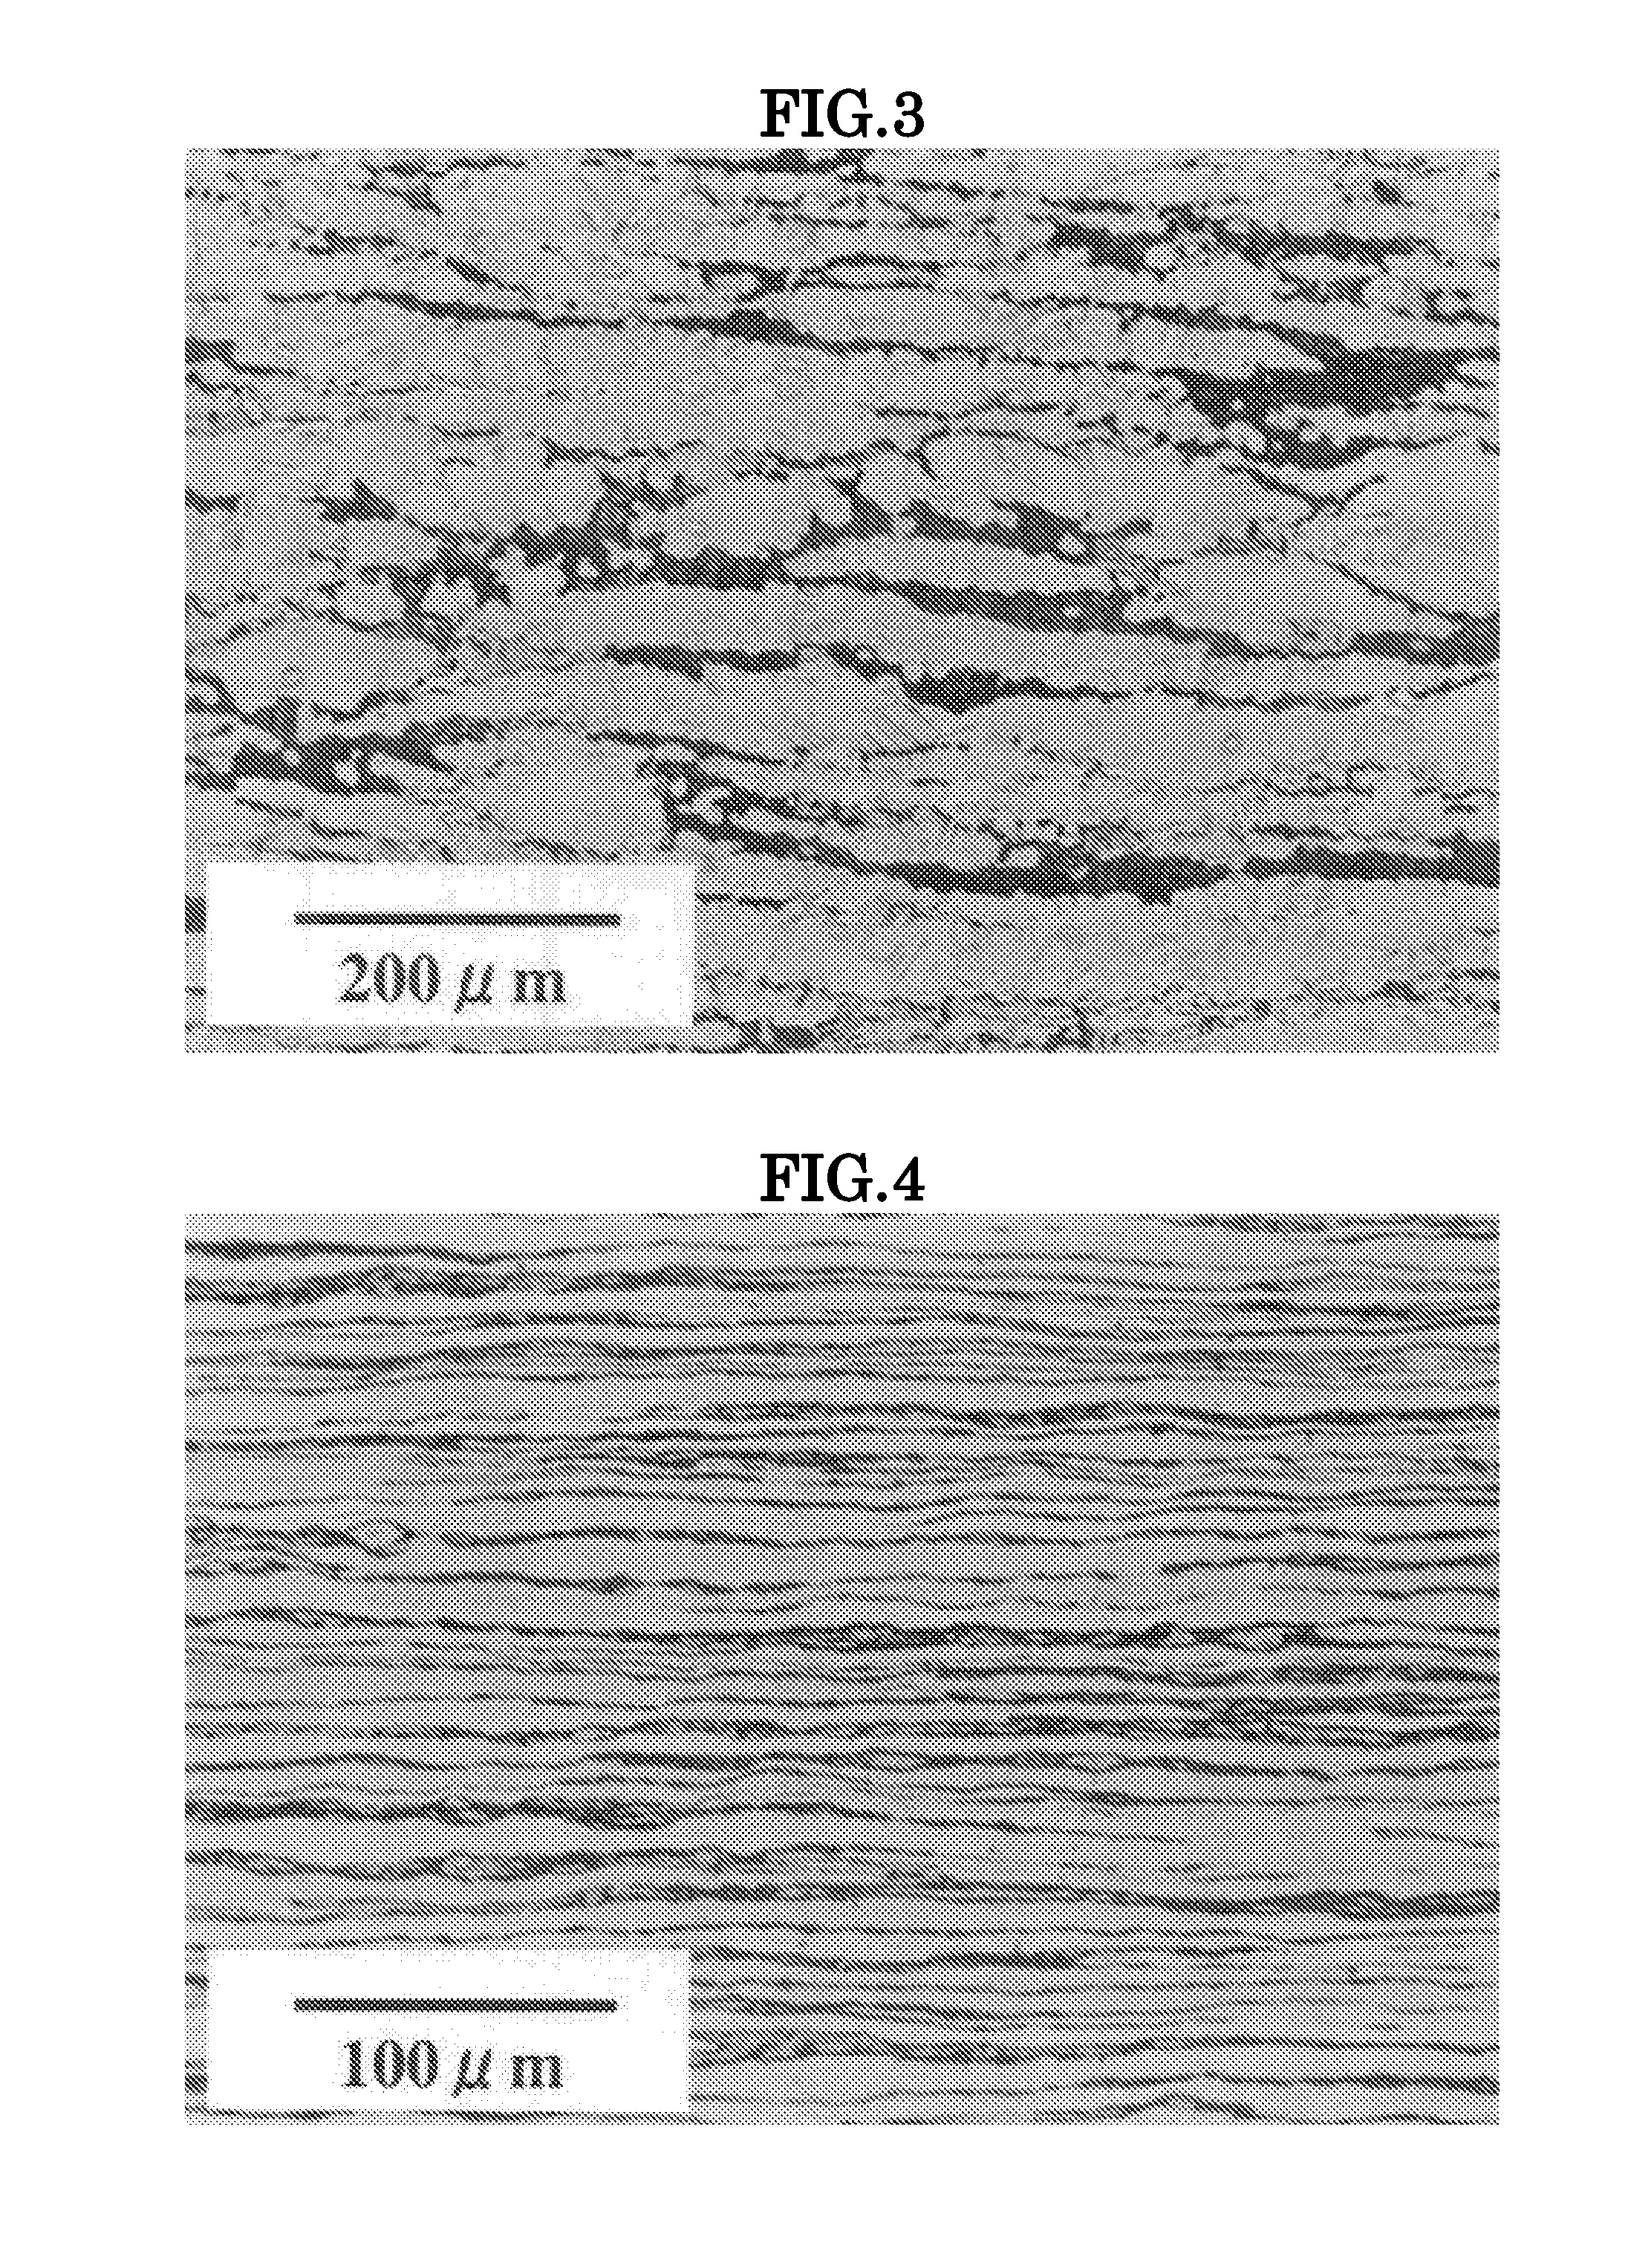 Silver-white copper alloy and process for producing the same